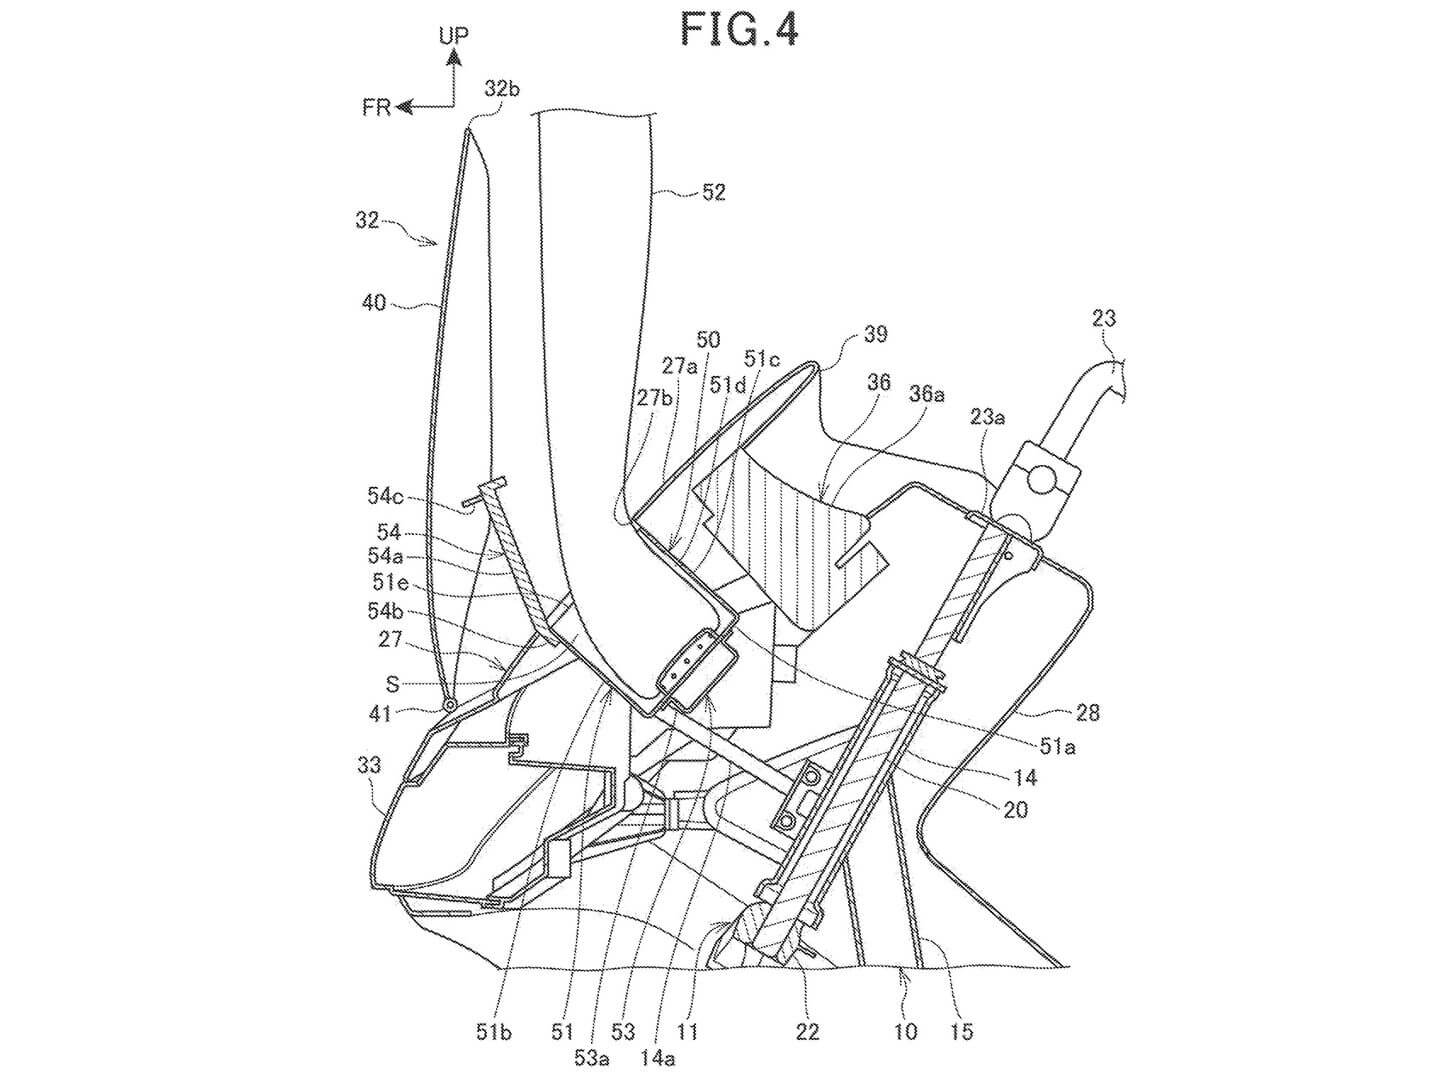 New 2023 Honda Motorcycle / Scooter Airbag Models Releasing Soon? New Patent Documents Filed...